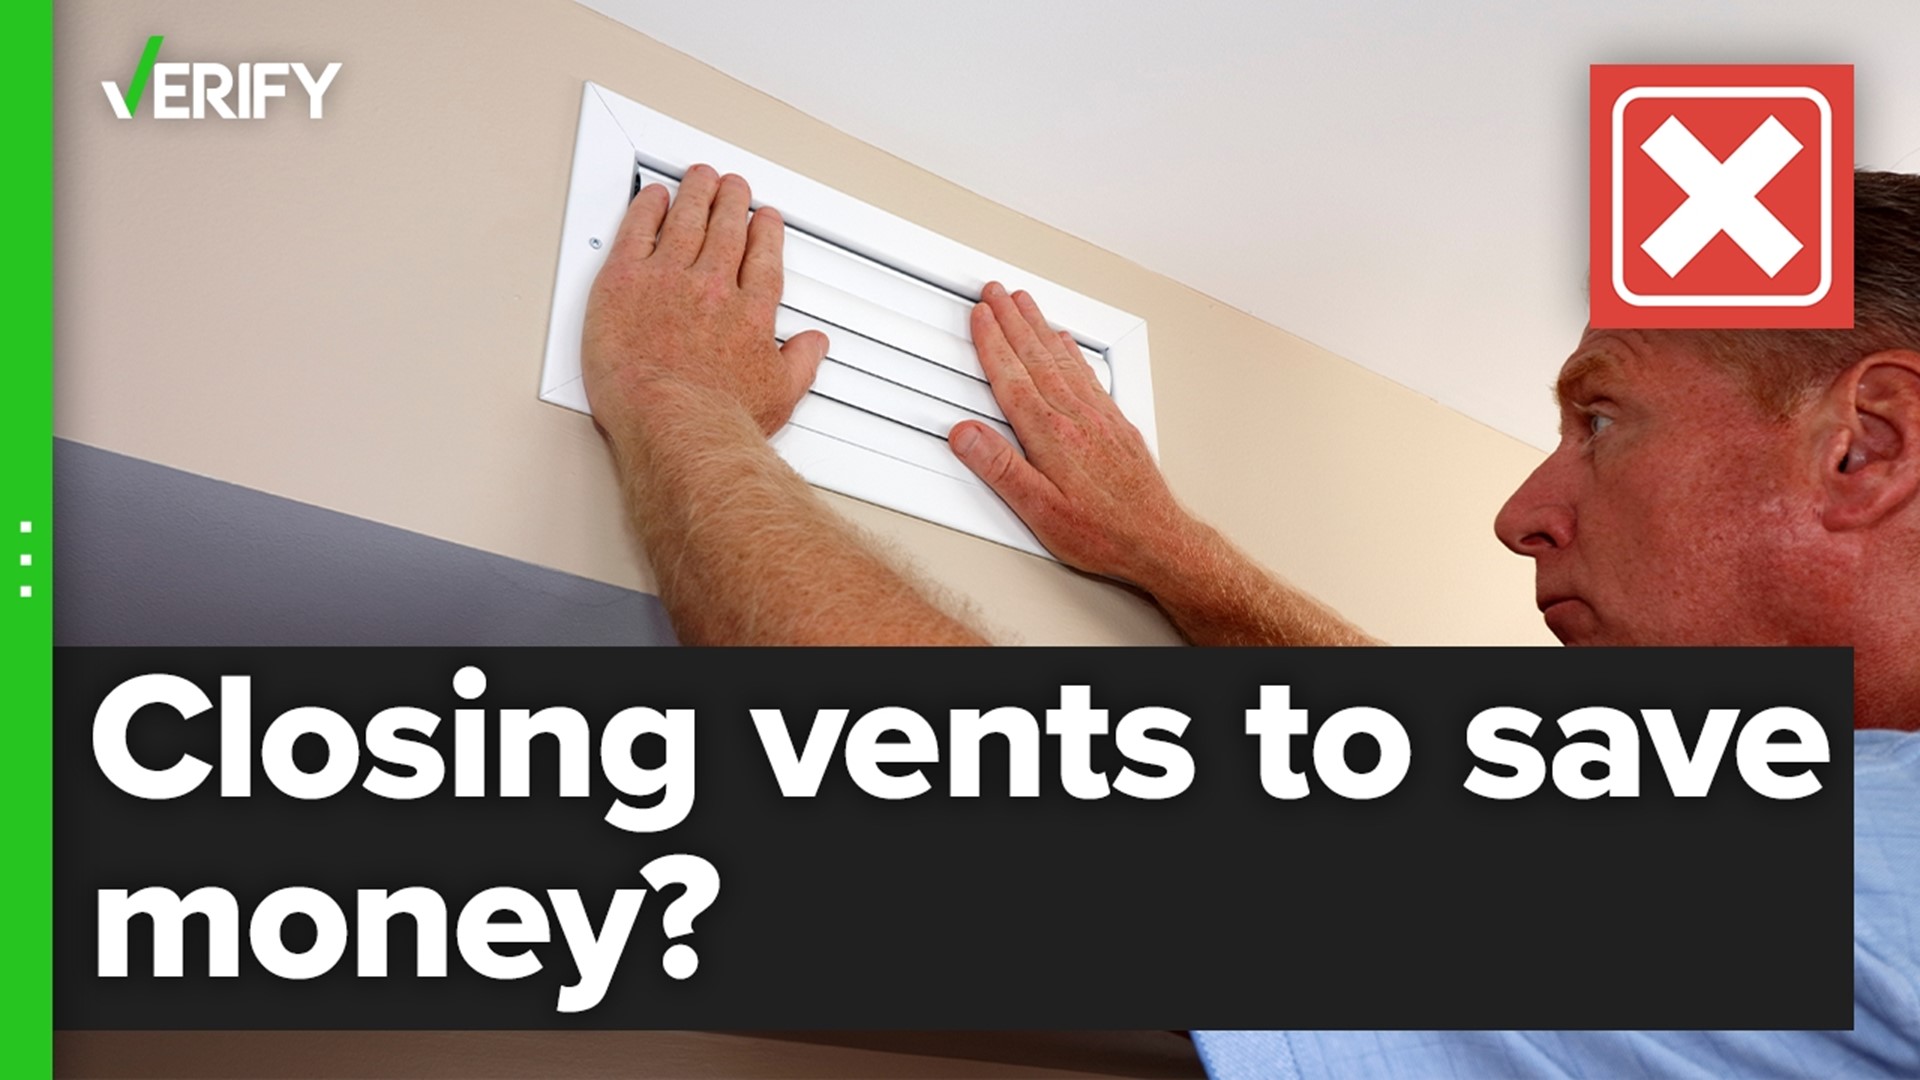 Completely closing vents won’t net you significant savings on your heating bill, and it might even increase your energy costs instead.